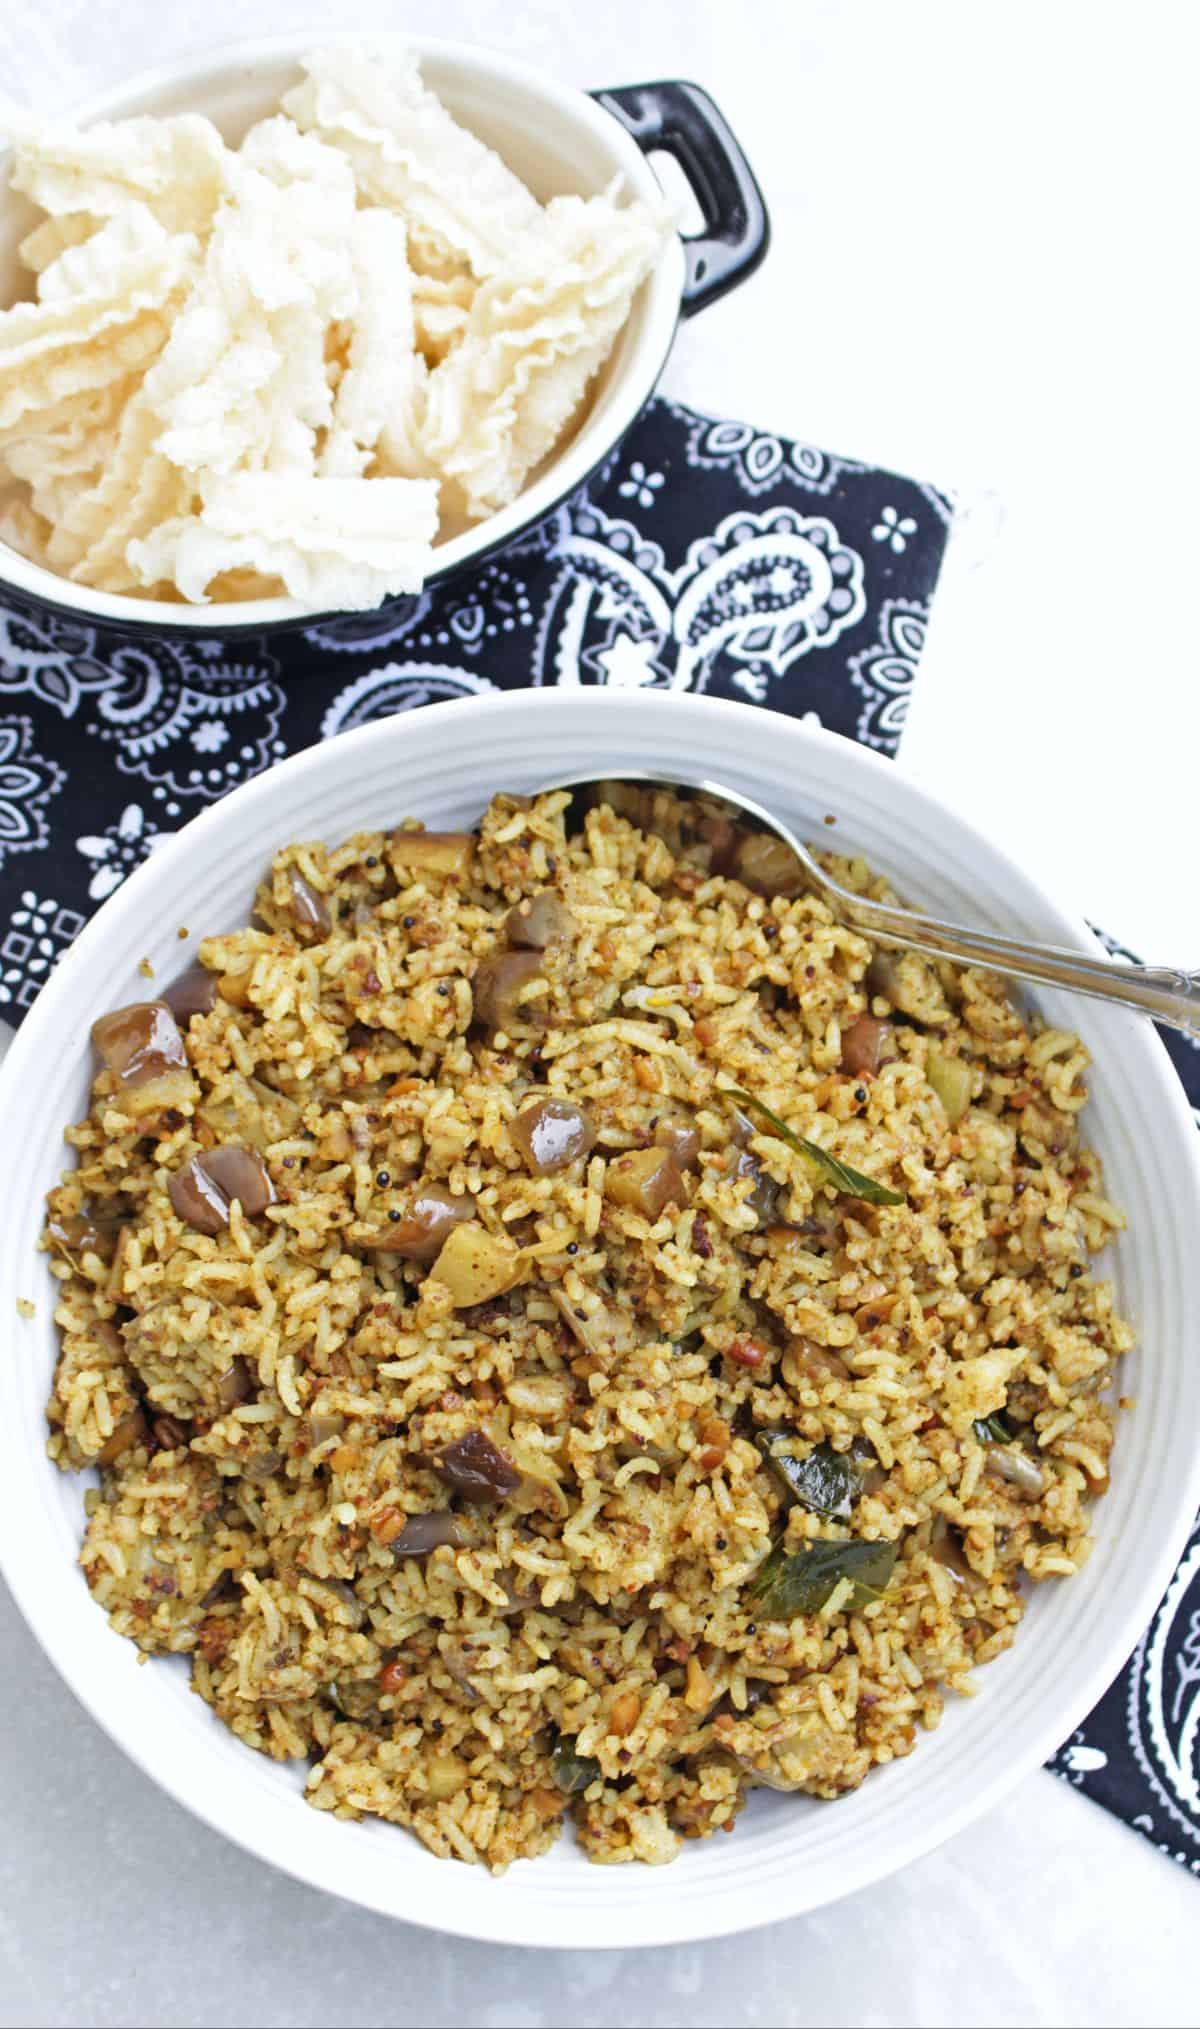 Brinjal rice served with vadam in a white bowl